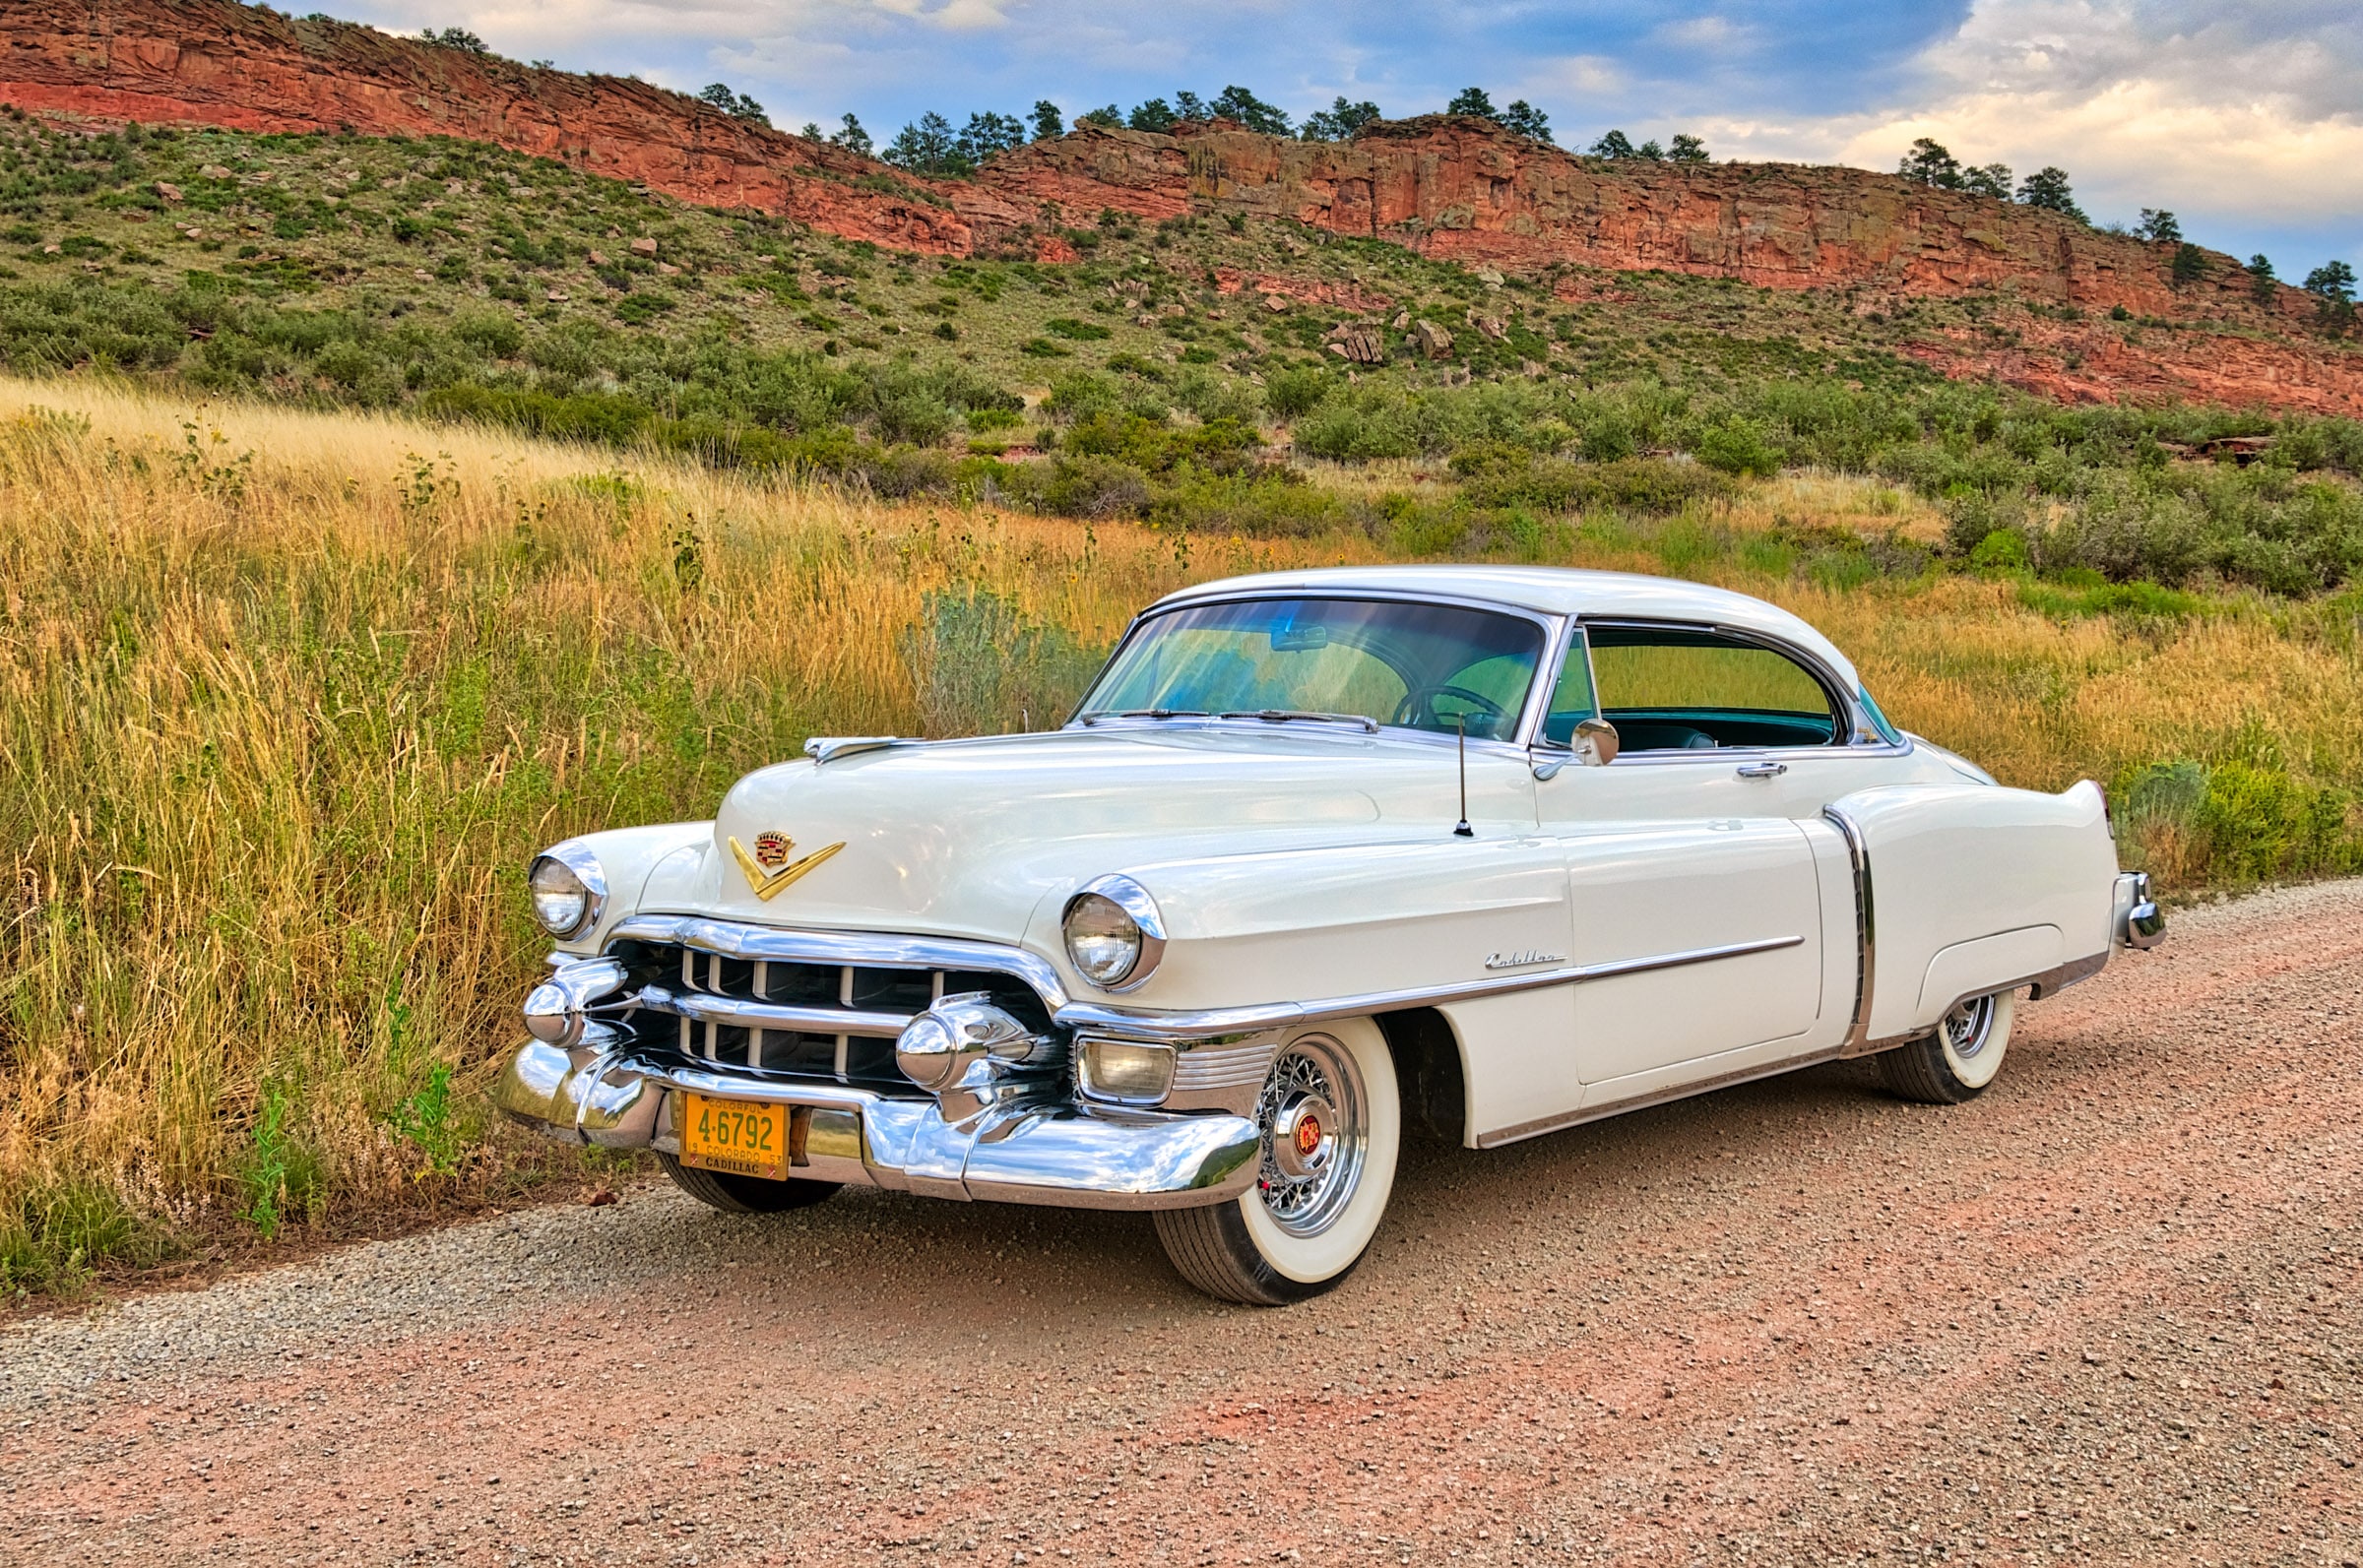 1953 Cadillac Coupe deVille - Left front three-quarter view with red rocks in the distance.